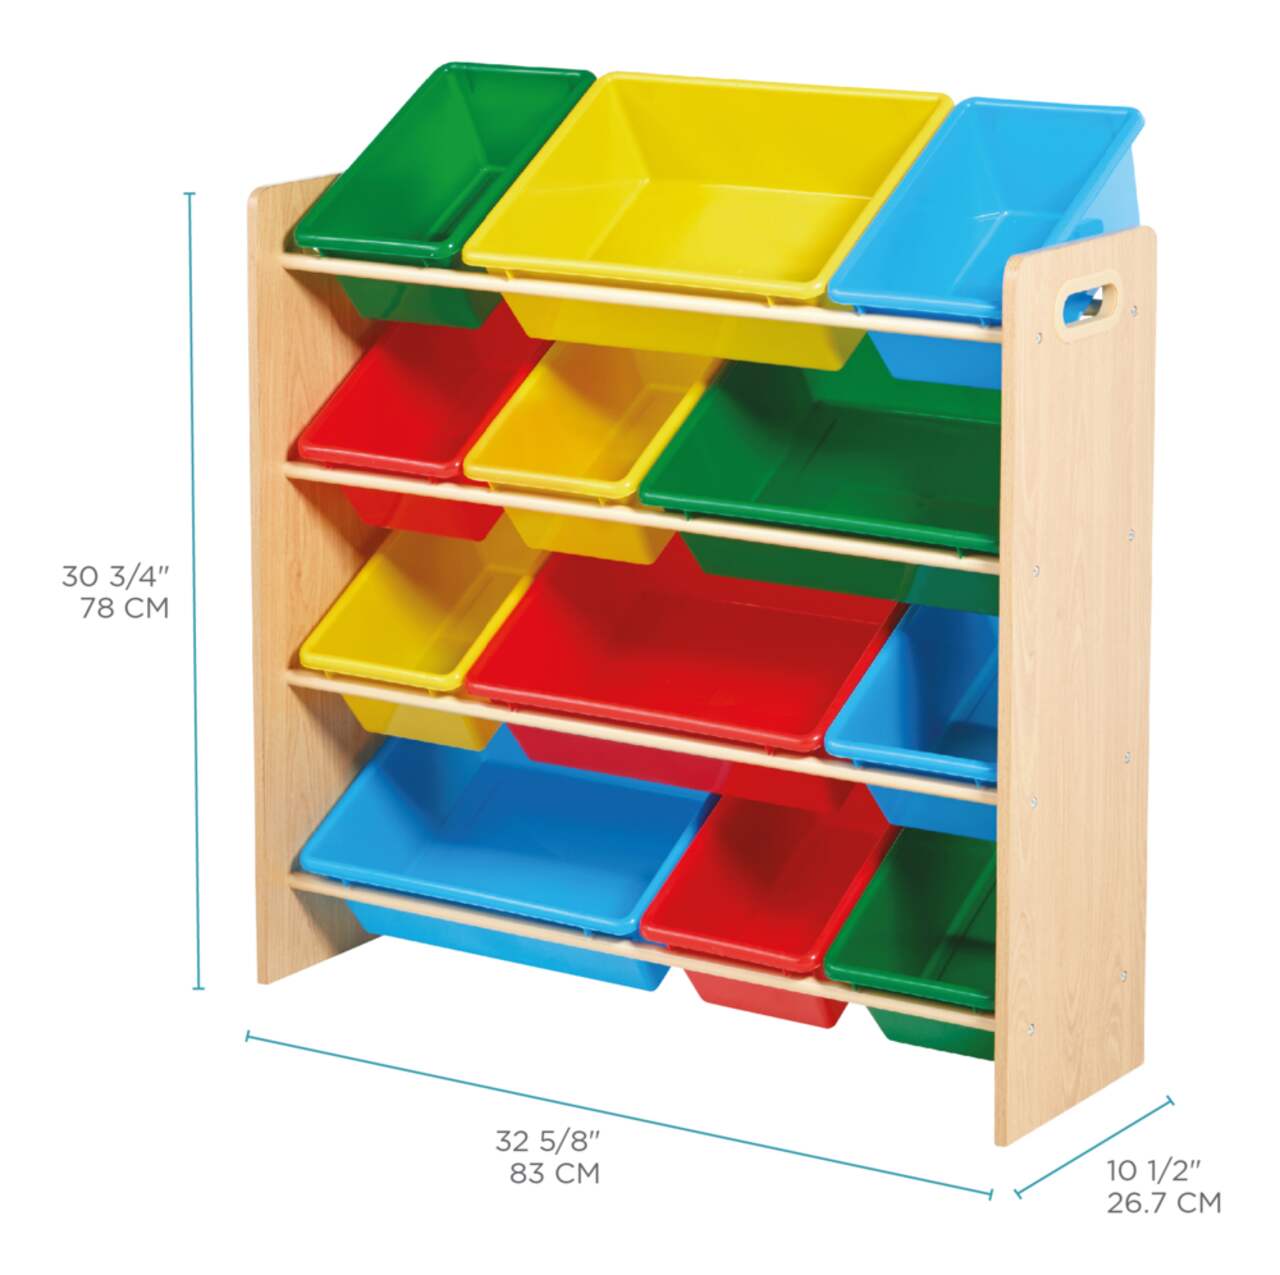 https://media-www.canadiantire.ca/product/living/home-decor/furniture/0680449/for-living-12-bin-organizer-66f3cb70-fd38-4231-b56b-7e0eec36e90b.png?imdensity=1&imwidth=1244&impolicy=mZoom